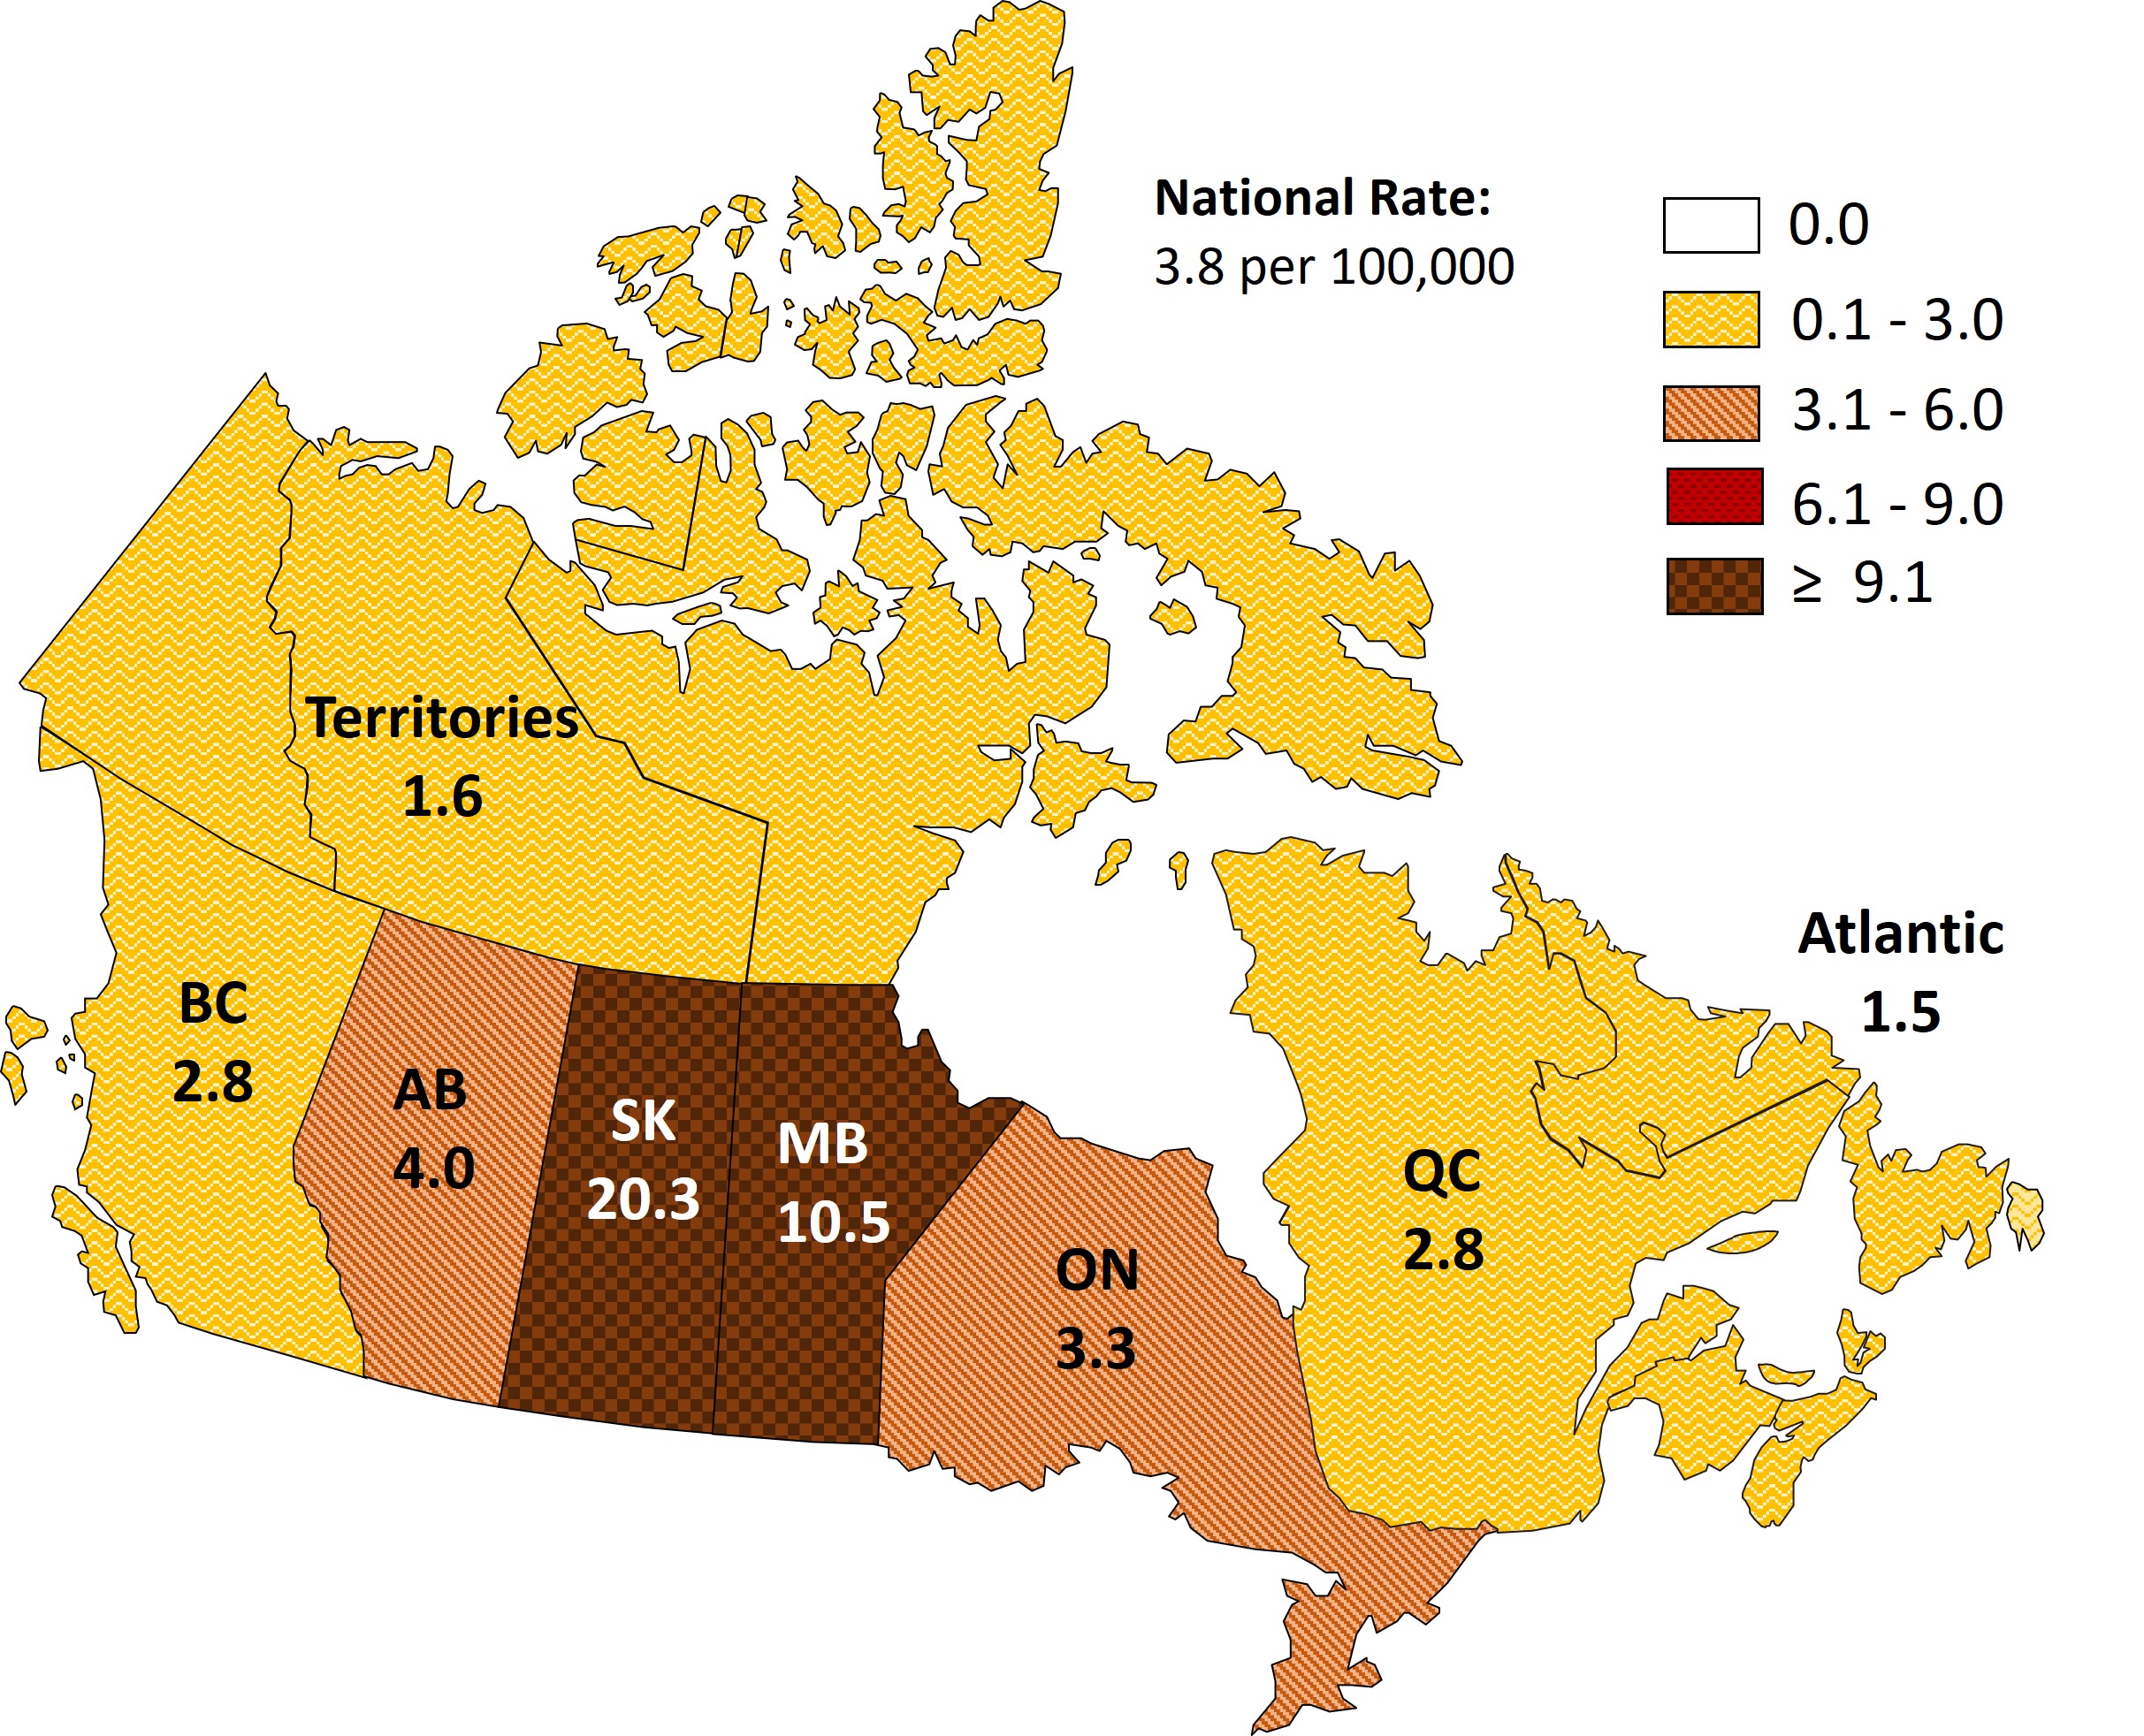 Figure 3: First-time HIV diagnosis rate per 100,000 population, by province or territory, Canada, 2021 